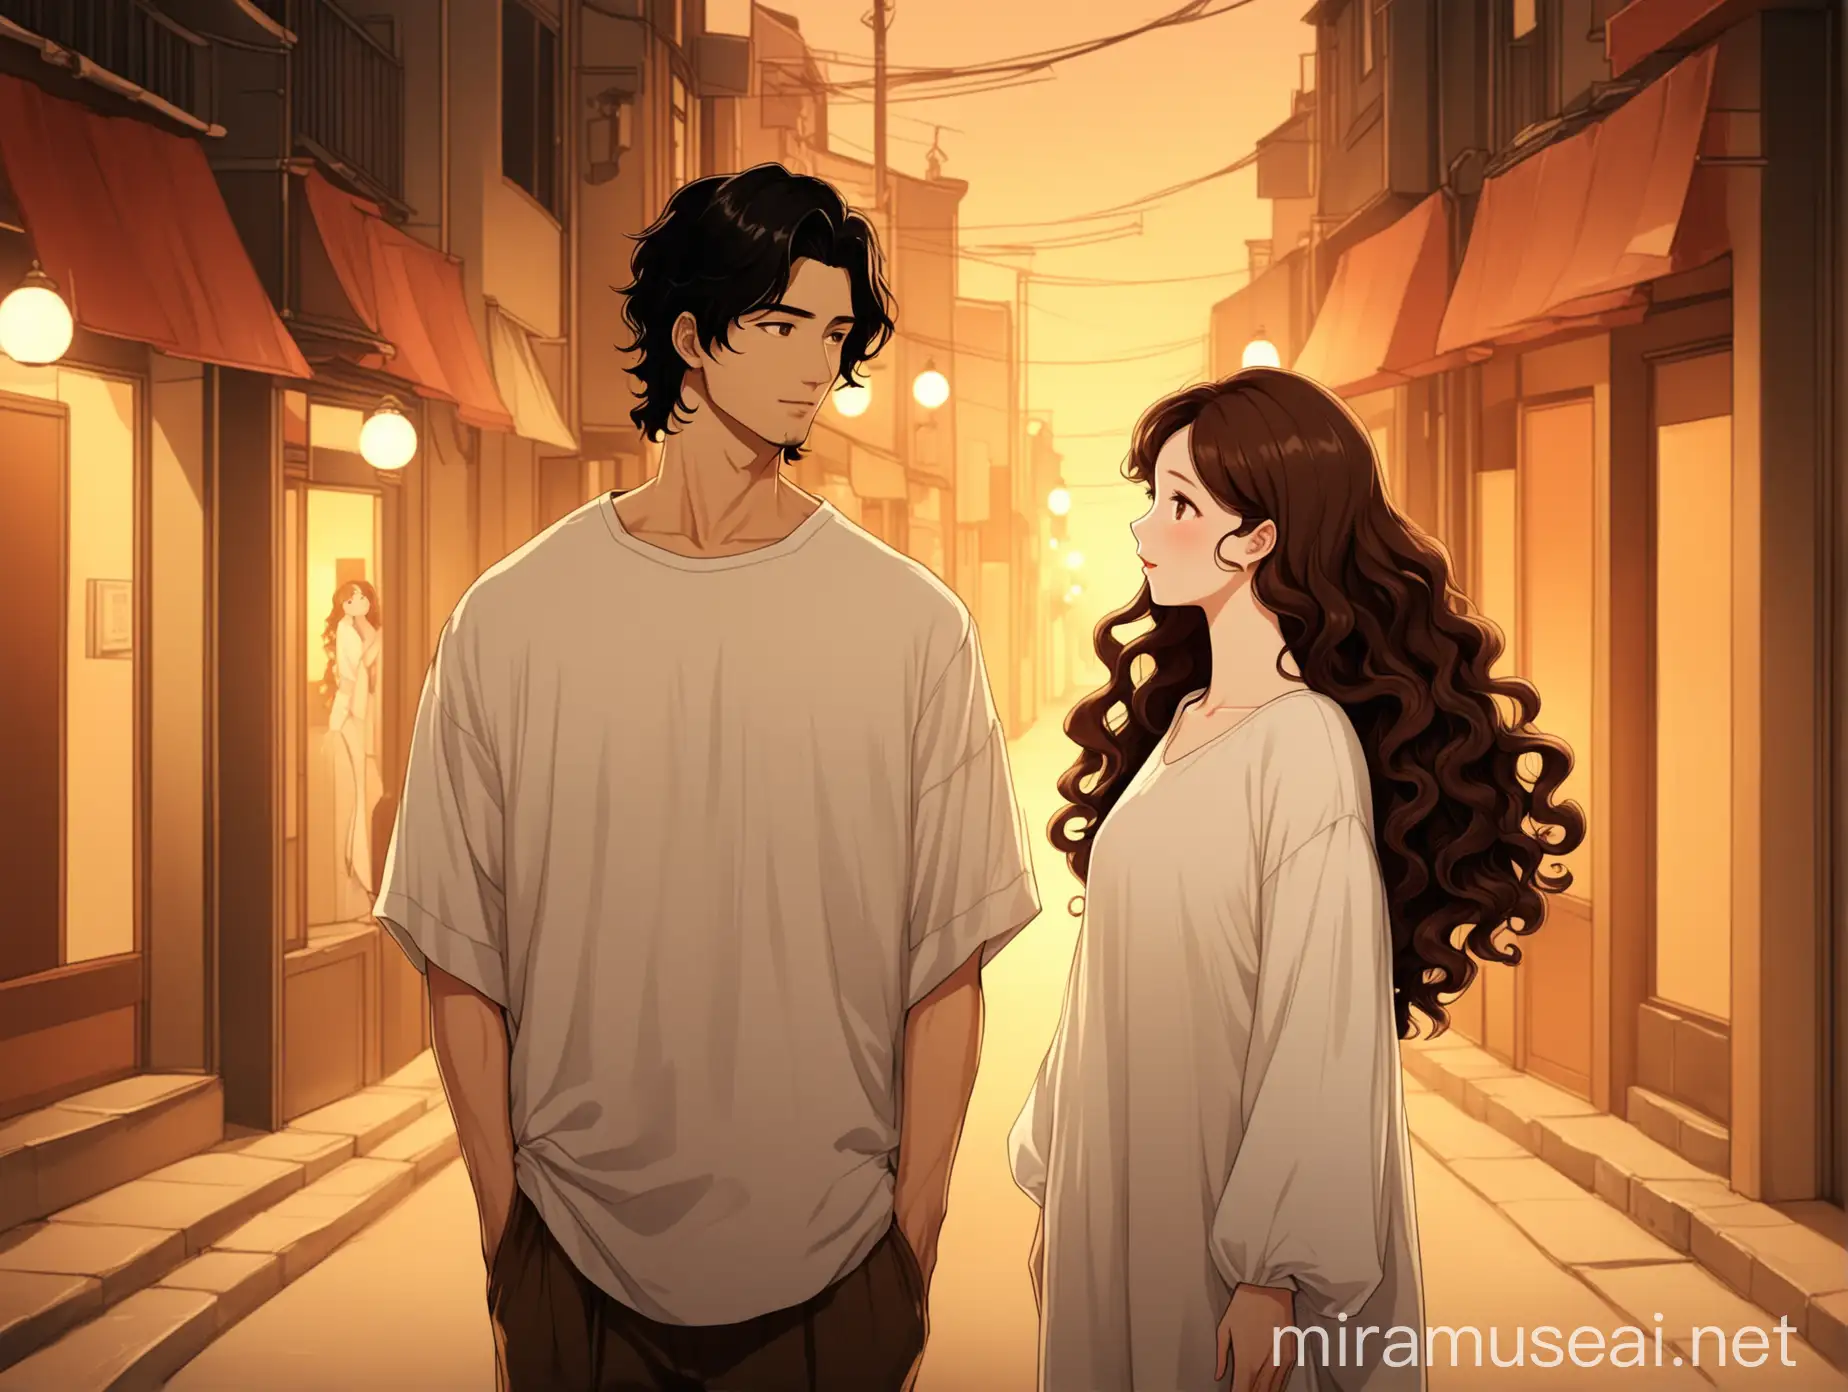 Romantic Korean Couple in Cartoon Illustration Style Handsome Man and Beautiful Woman in Warm Street Background